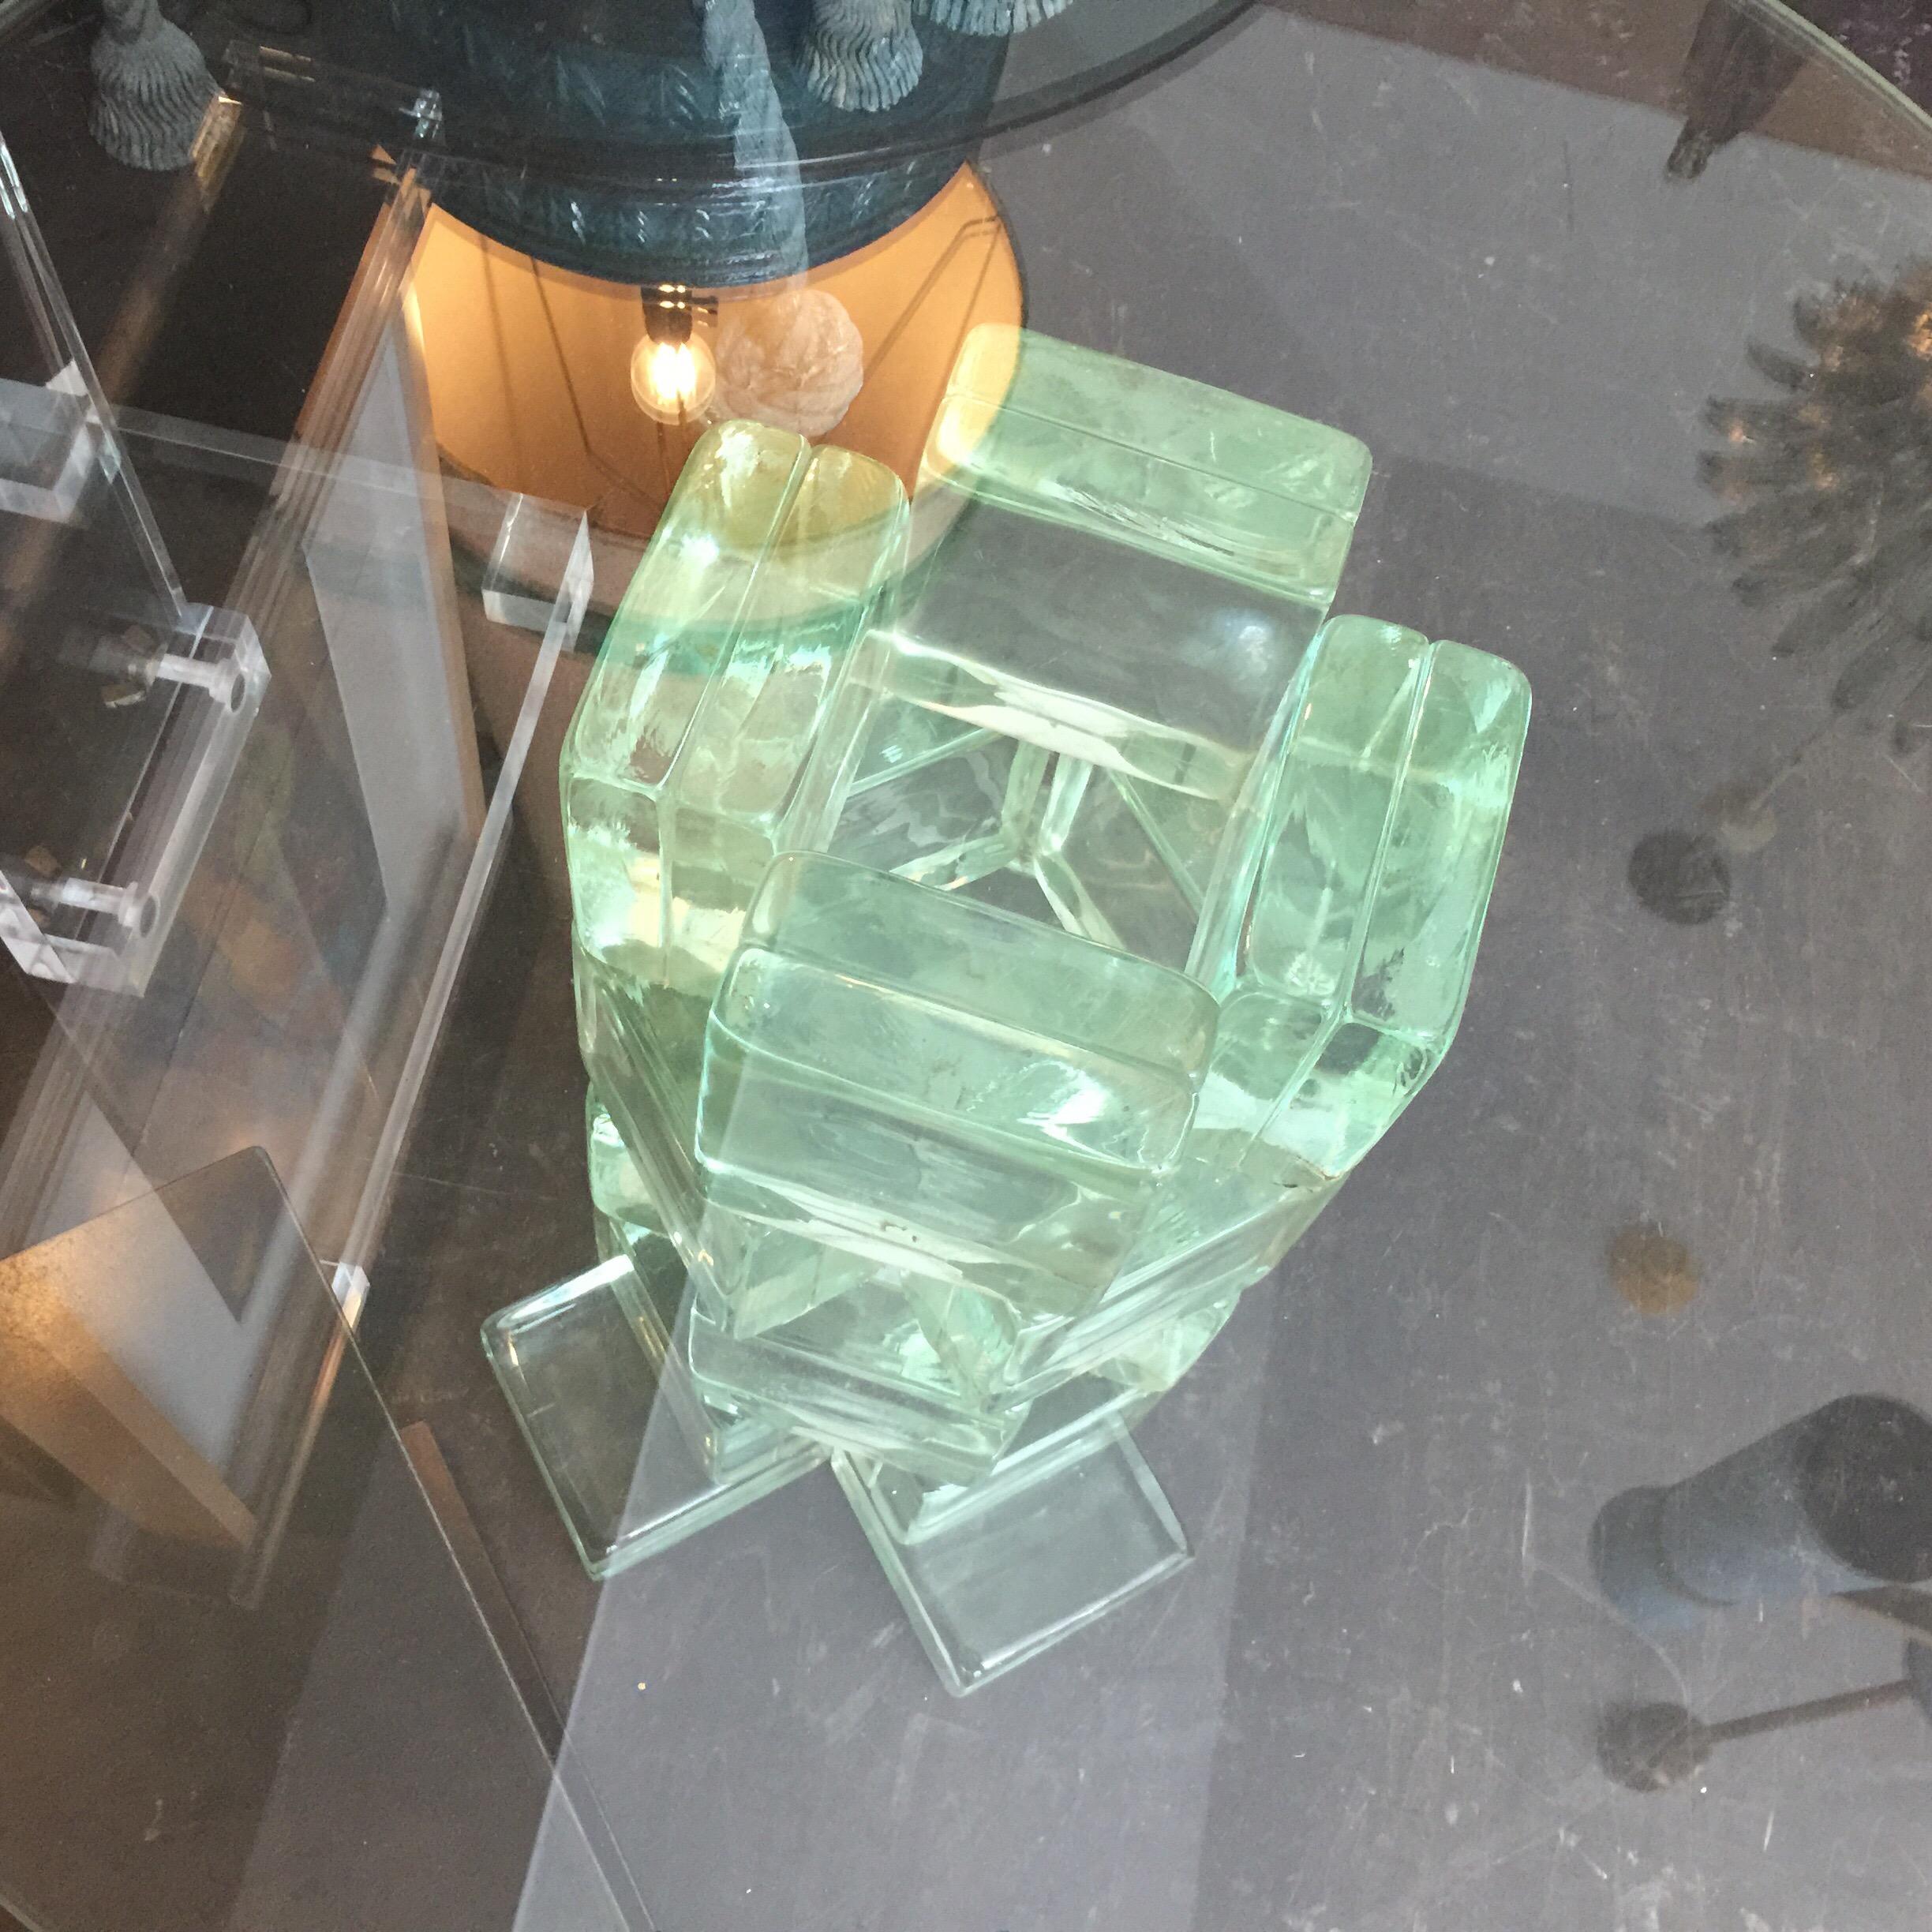 Unusual modern sculptural base made out of pale green glass block side table by Imperial Imagineering.